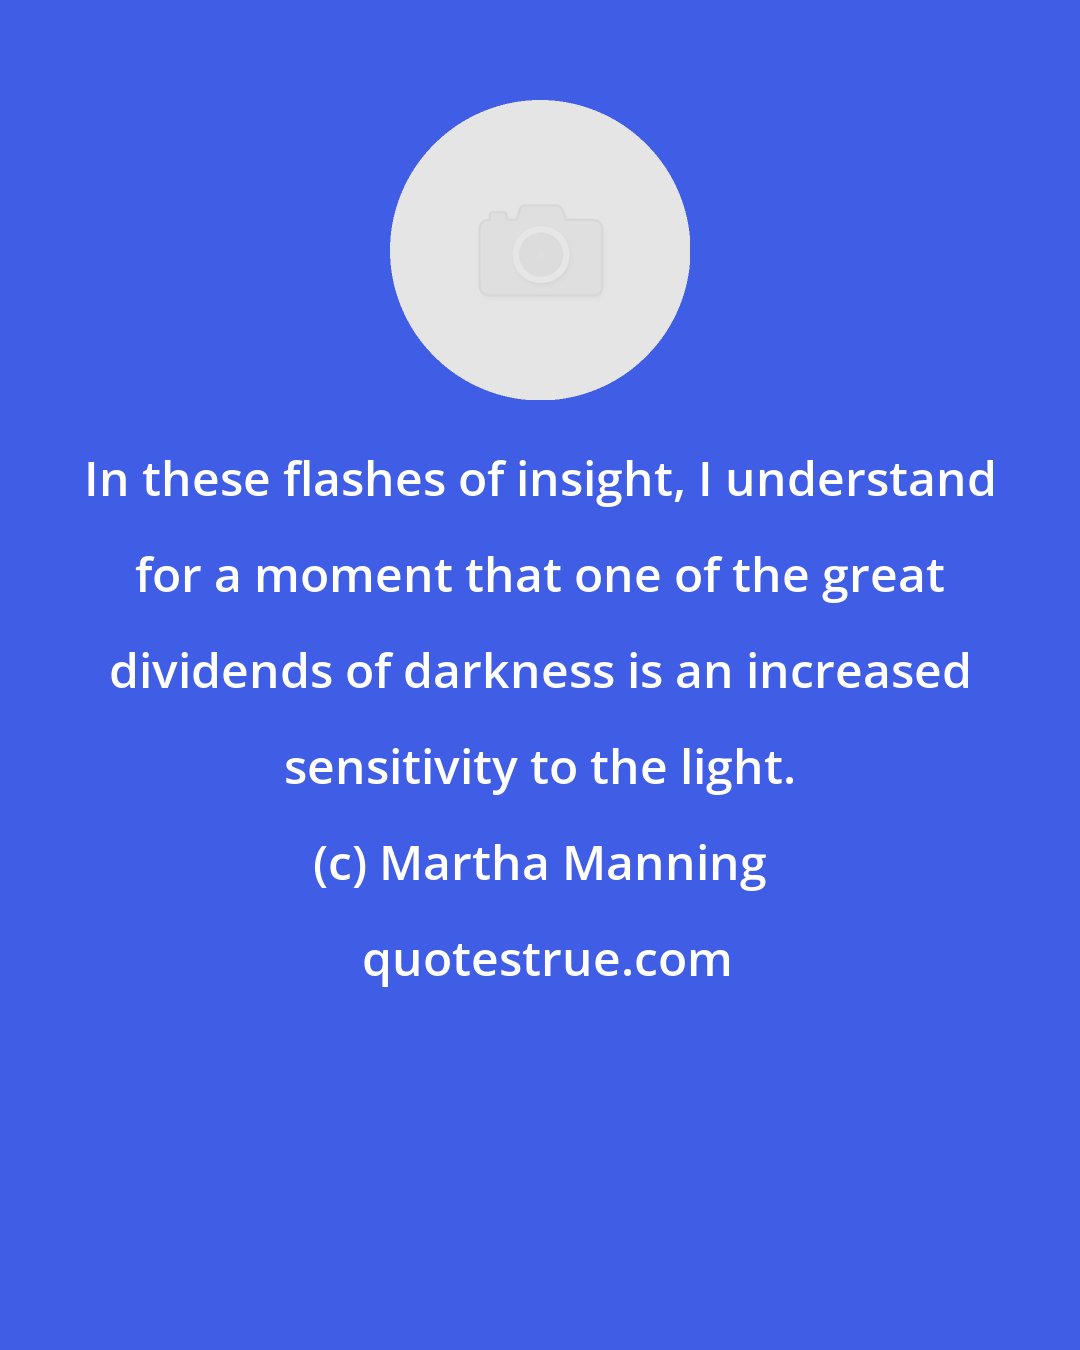 Martha Manning: In these flashes of insight, I understand for a moment that one of the great dividends of darkness is an increased sensitivity to the light.